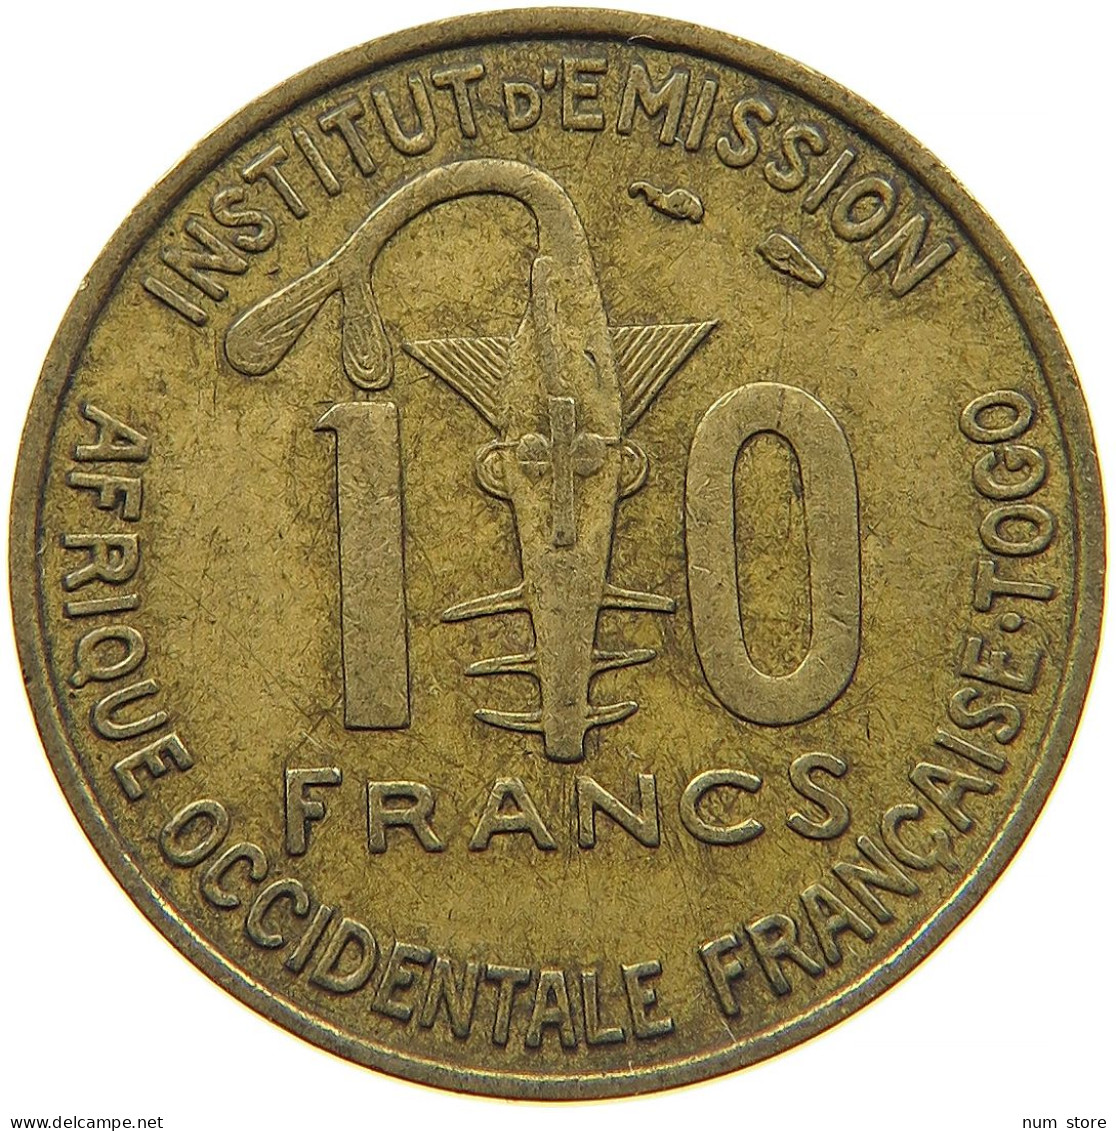 FRENCH WEST AFRICA 10 FRANCS 1957 #s089 0225 - French West Africa